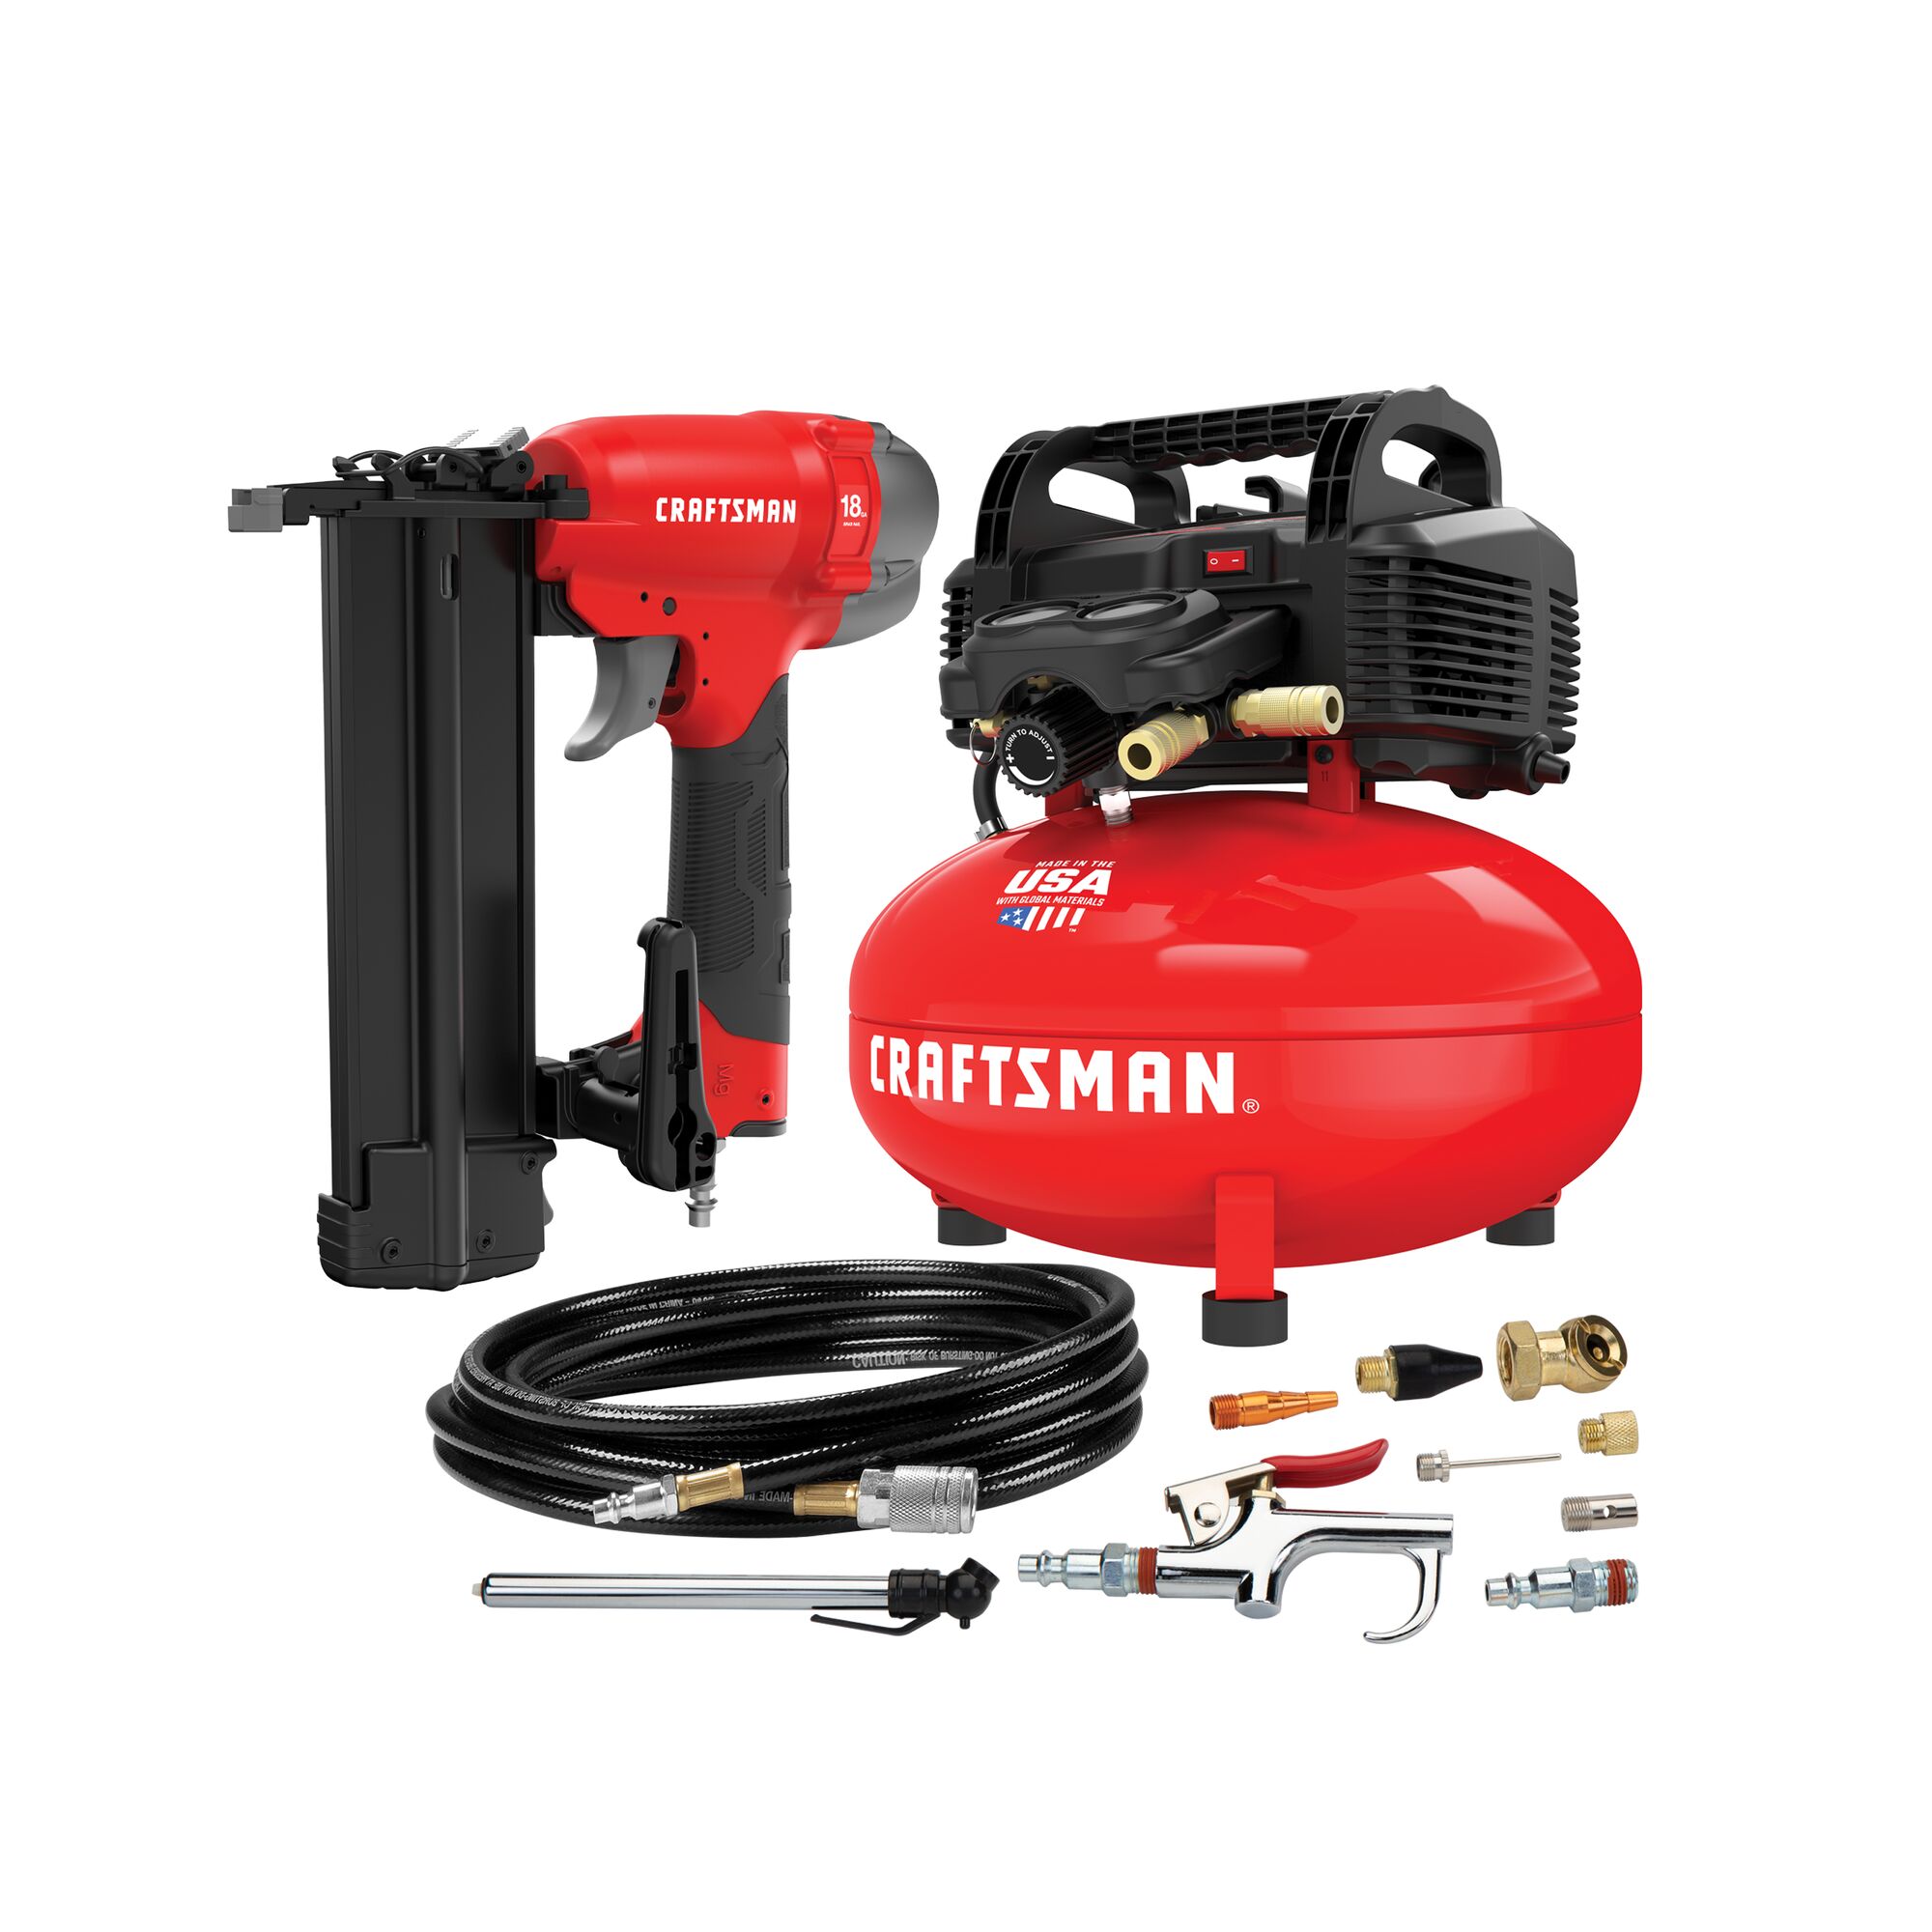 View of CRAFTSMAN Nailer: Finishing family of products